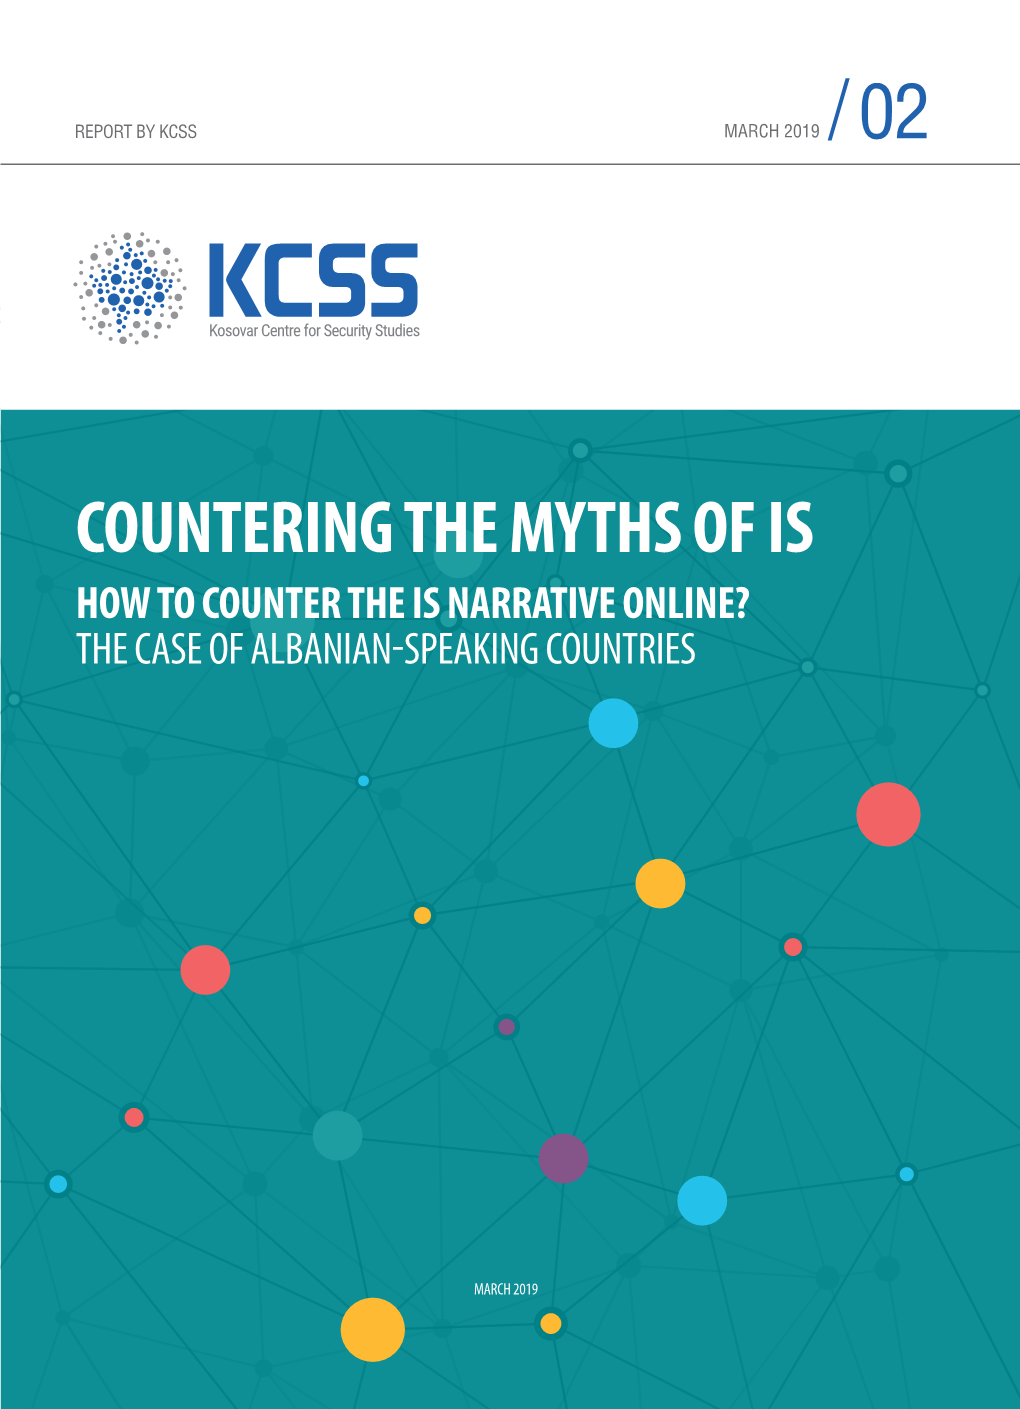 Countering the Myths of Is How to Counter the Is Narrative Online? the Case of Albanian Speaking Countries